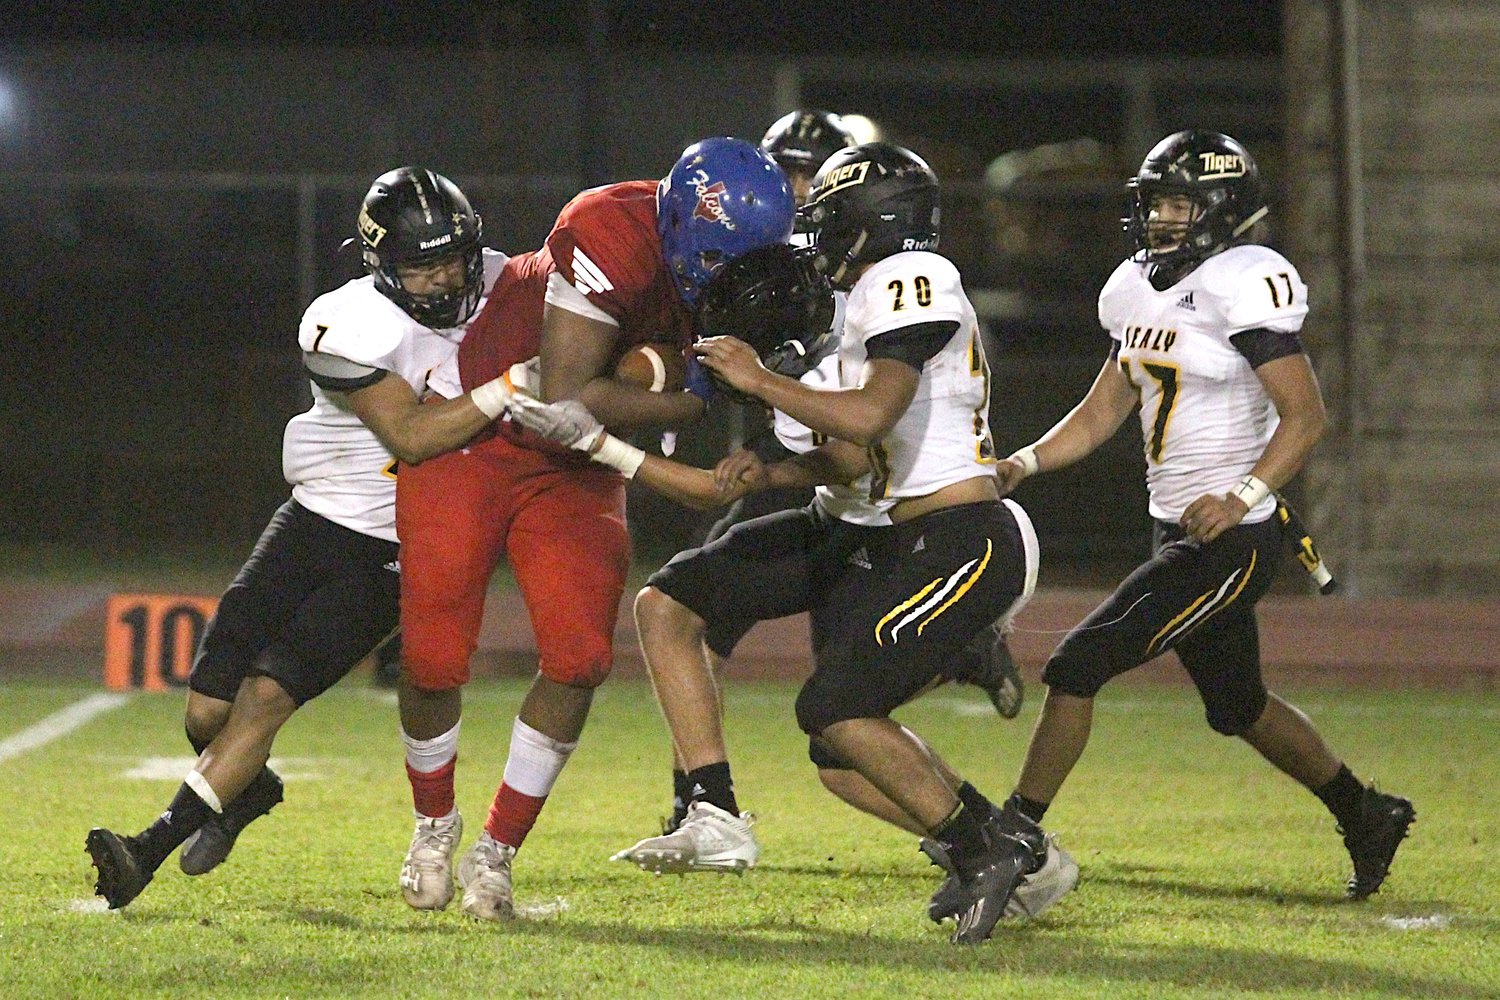 Royal senior tight end Jeremiah Venson drags a host of Sealy defenders after making a catch in the fourth quarter that helped set up the Falcons’ lone score of their district-opening game against the Tigers.